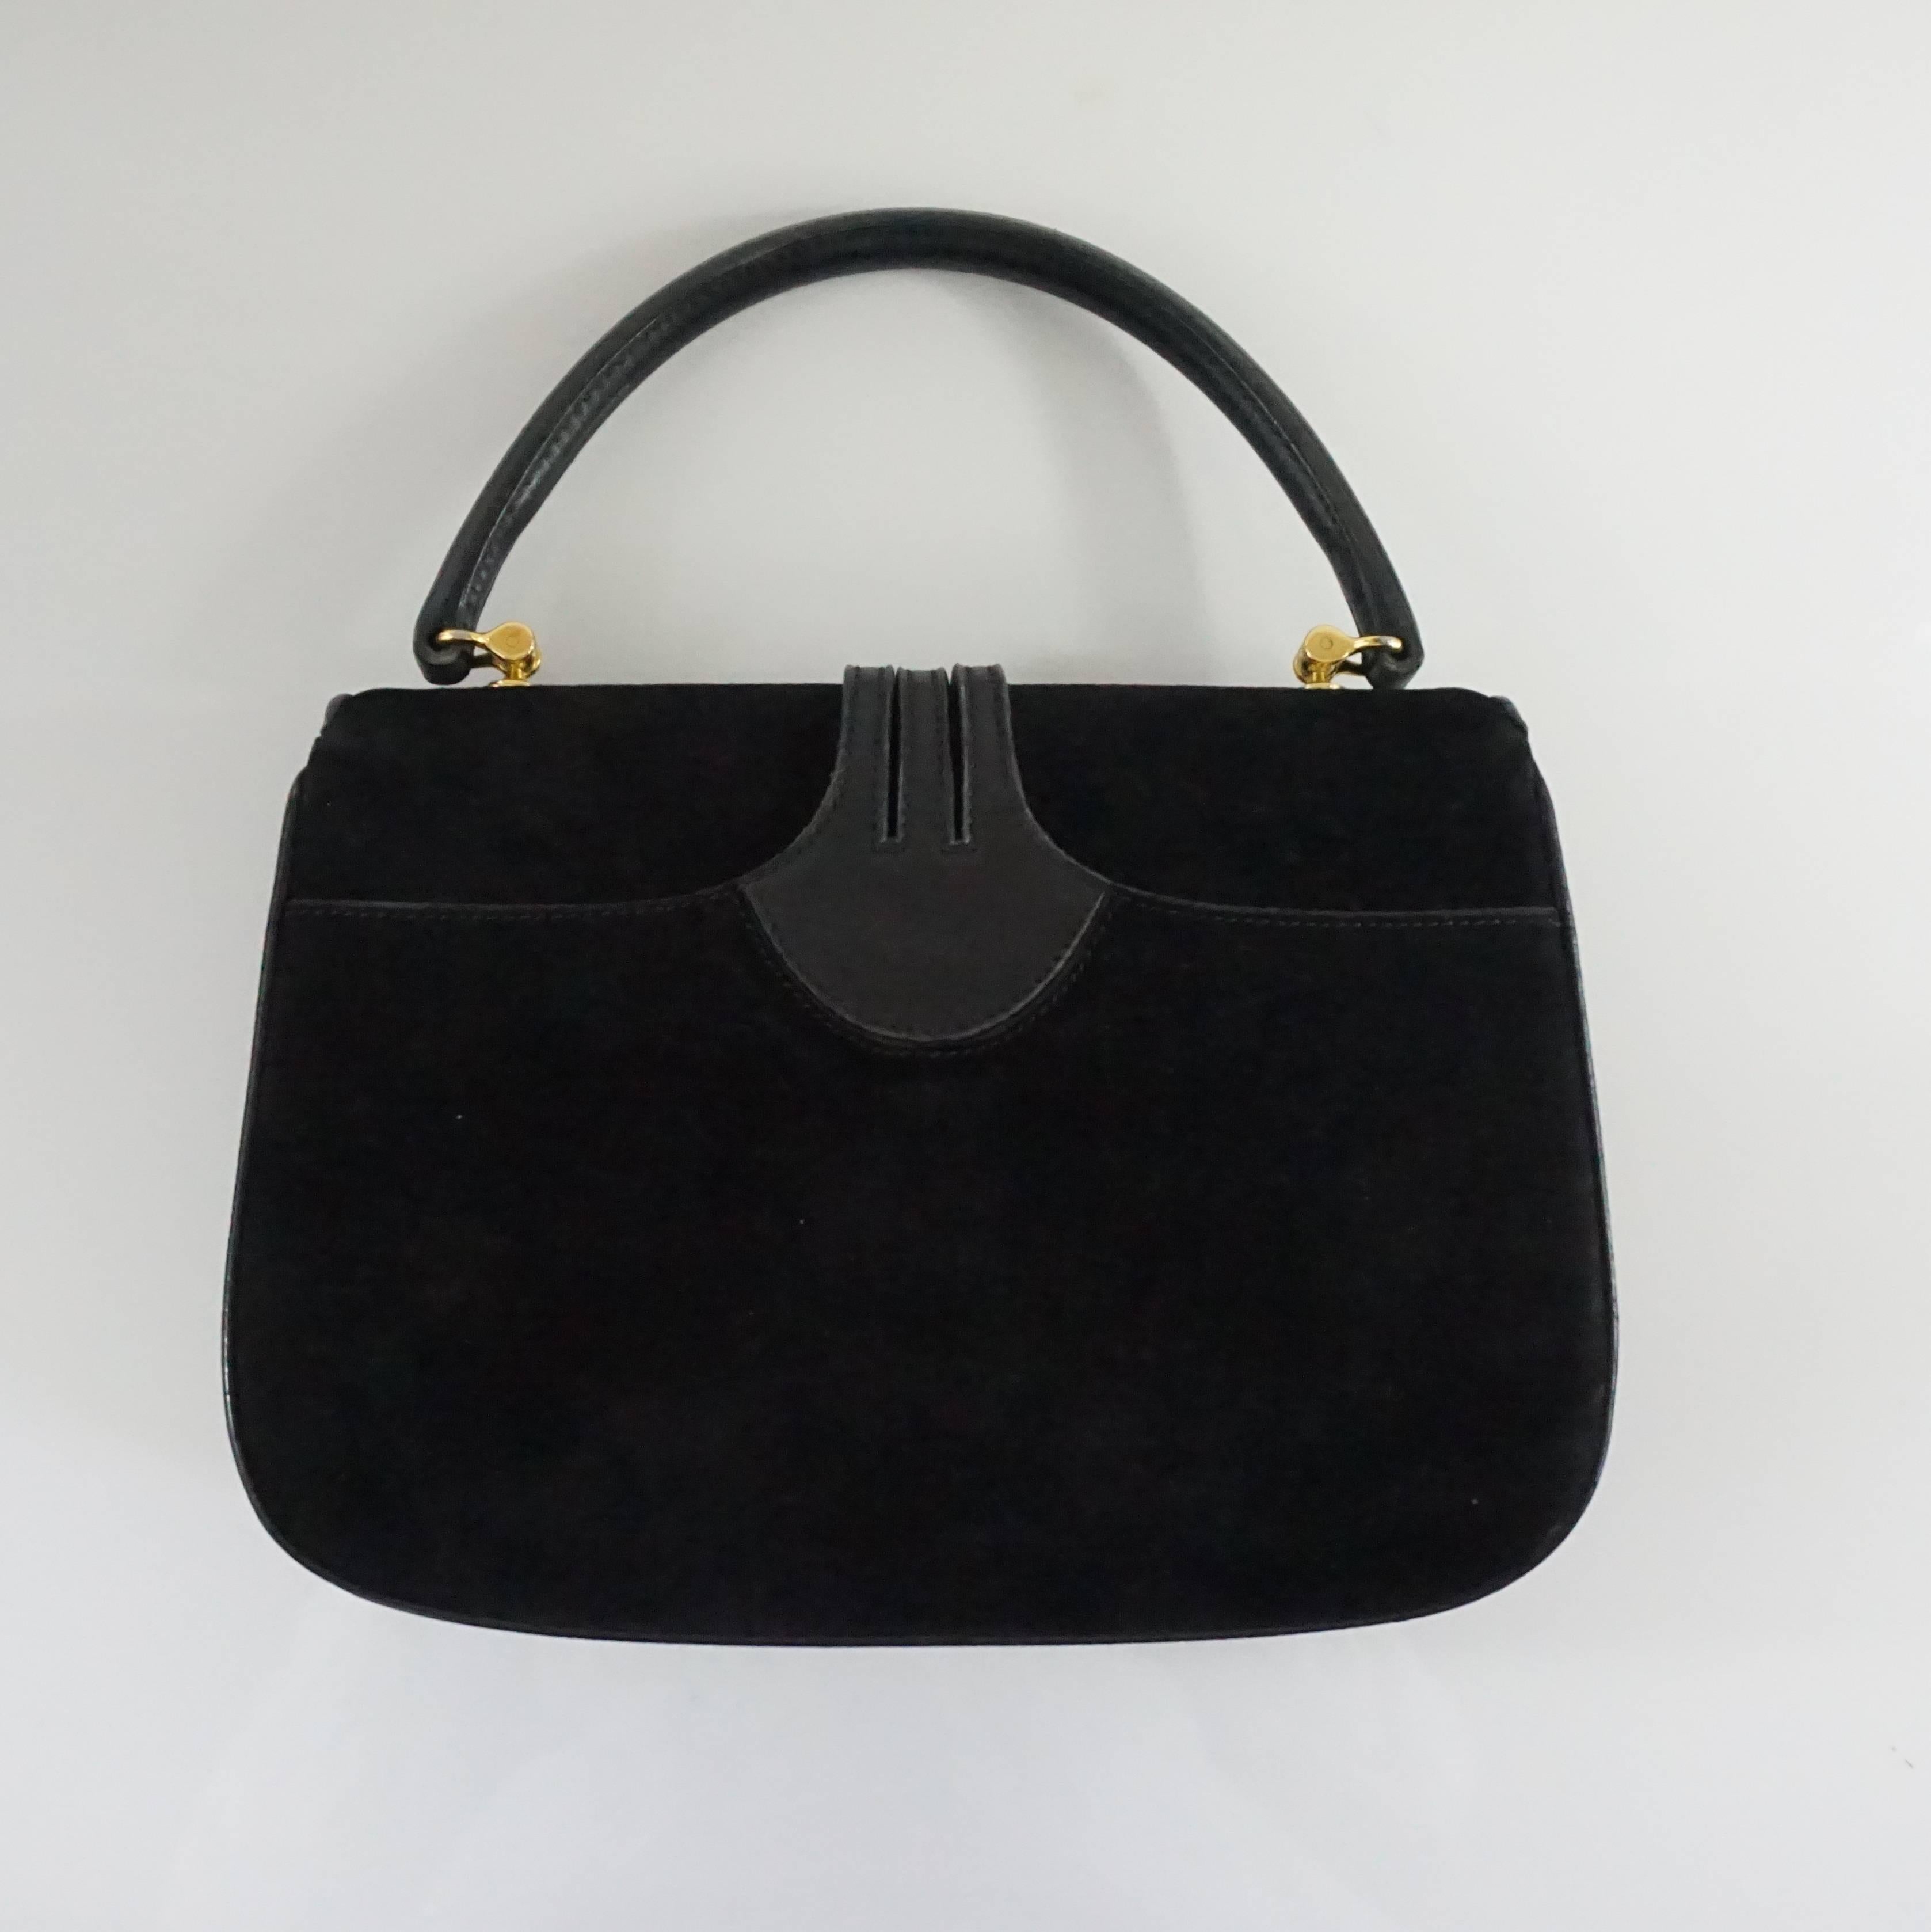 This vintage Gucci black suede bag has a leather top handle and leather detailing. It has gold hardware and a duster is included. This bag is in very good vintage condition with some wear to the hardware and